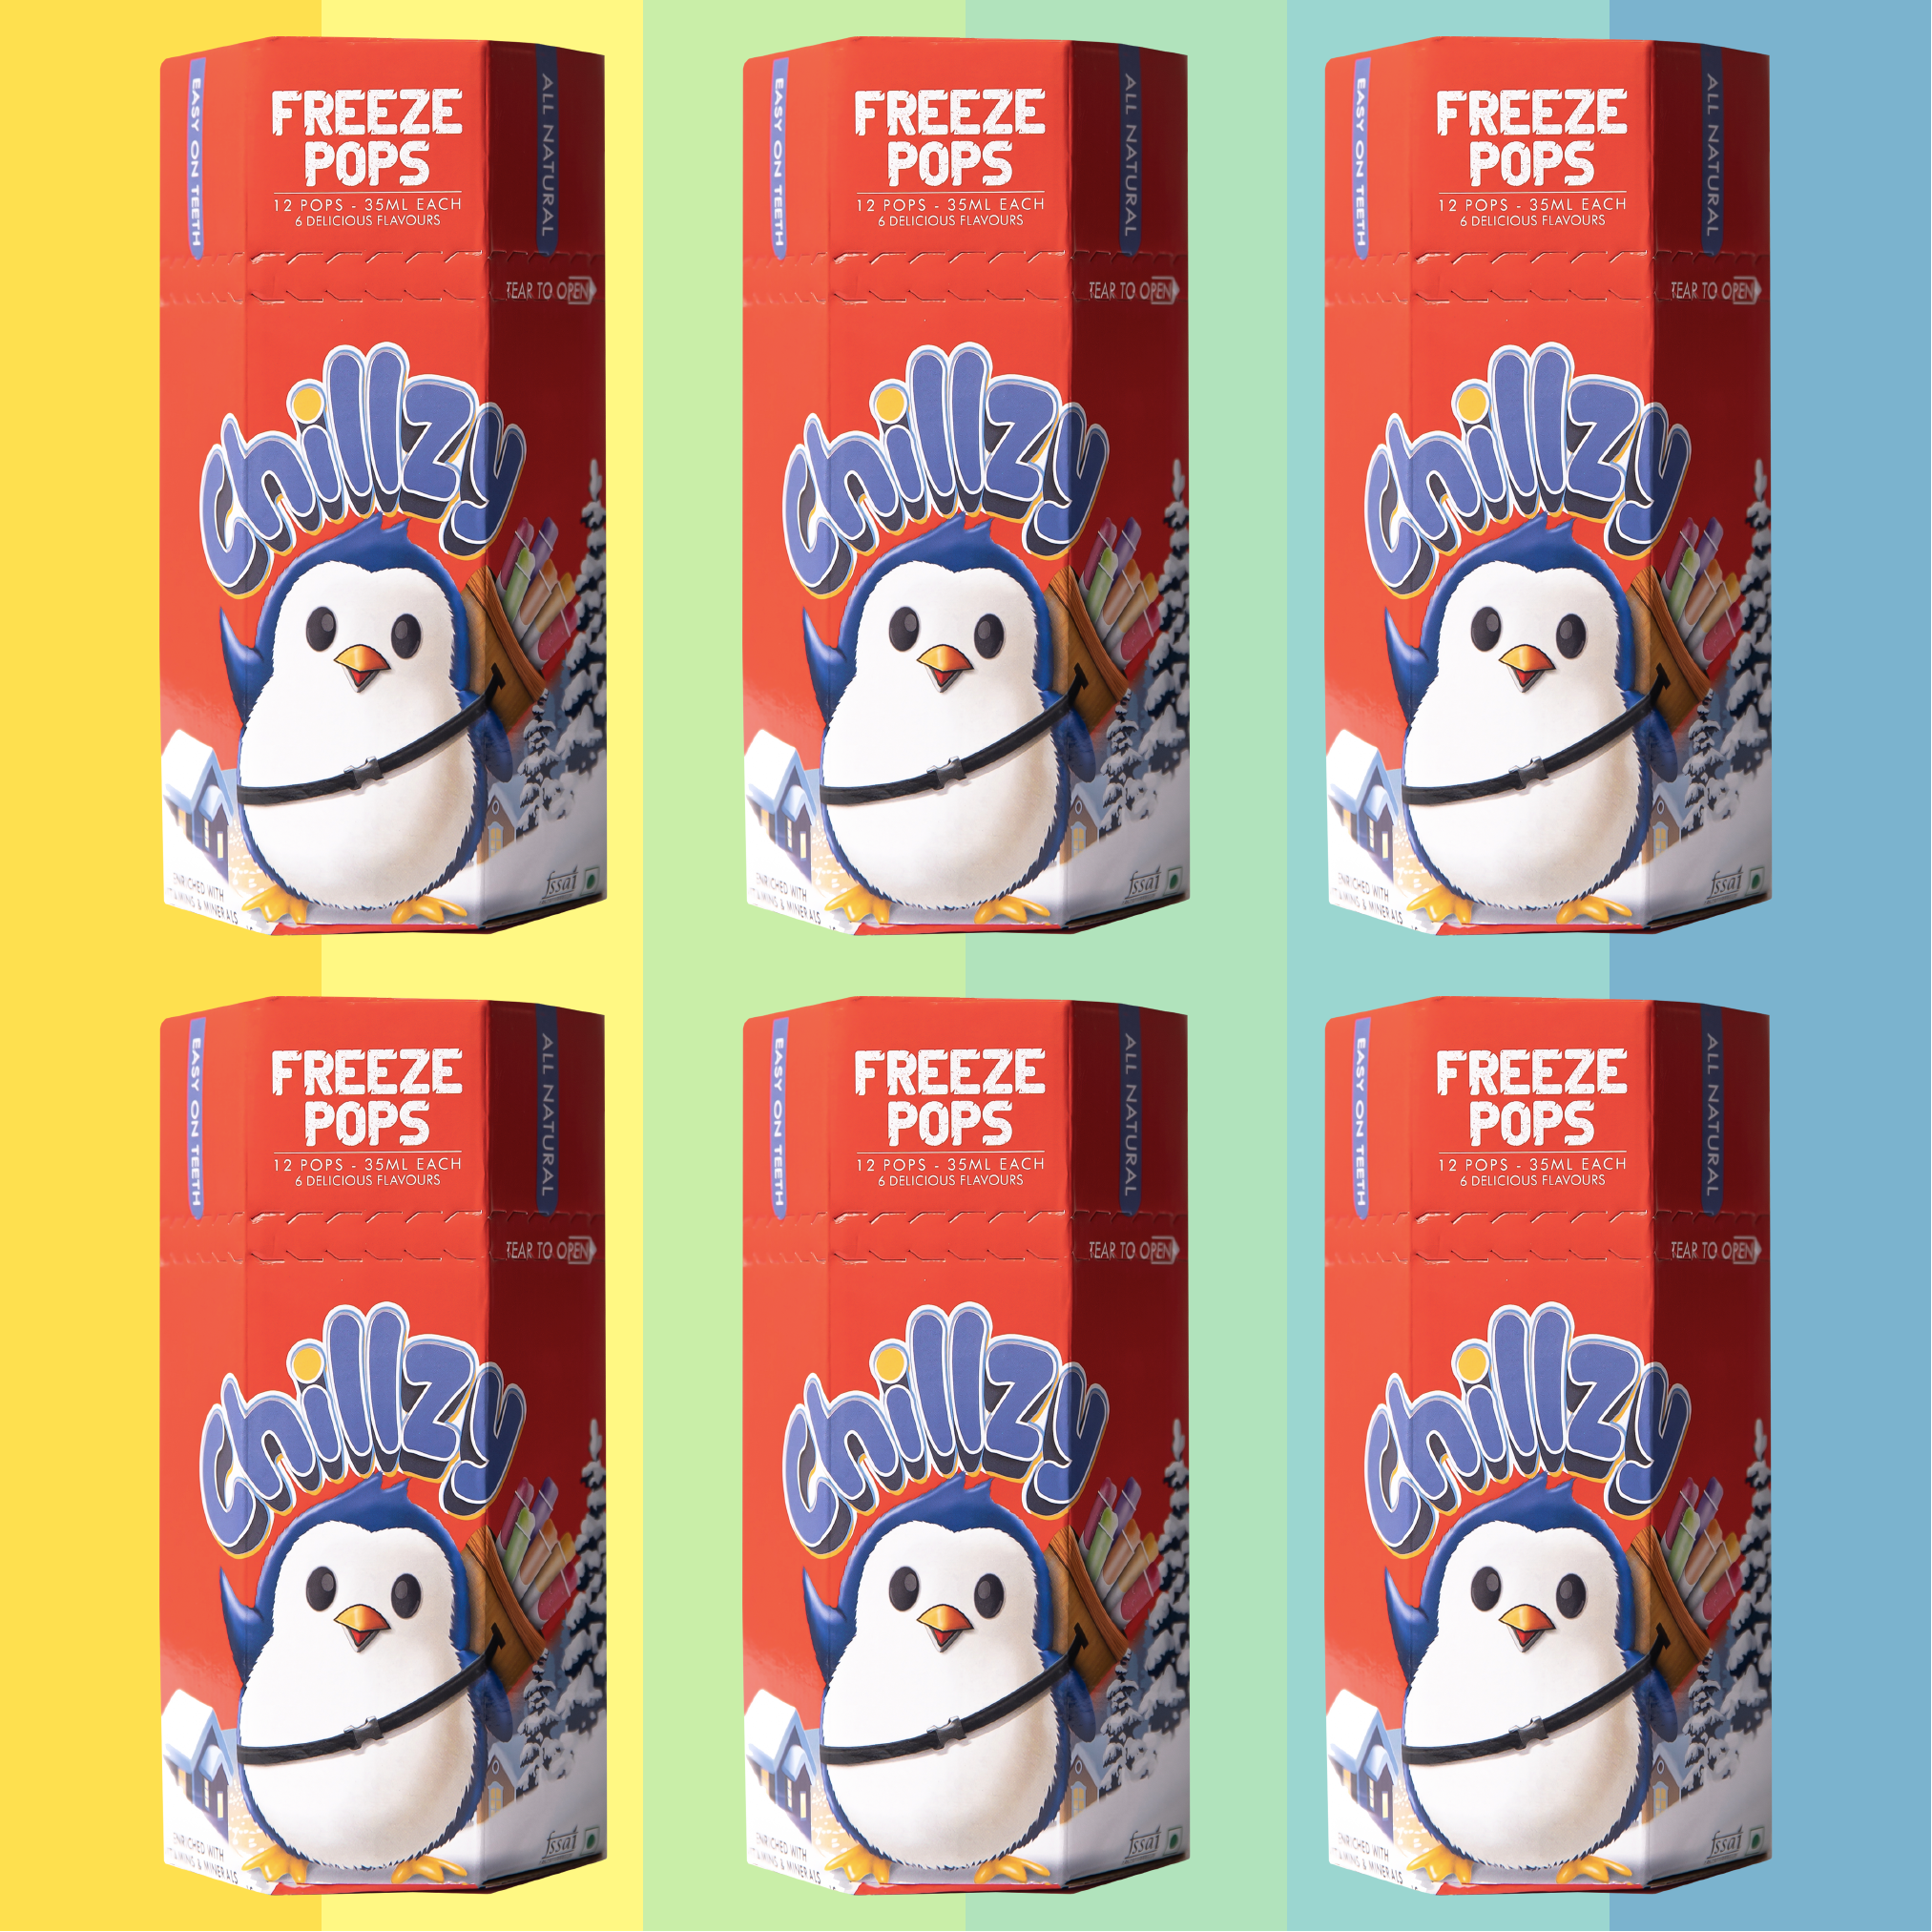 Chillzy Red 6 Pack of Boxes